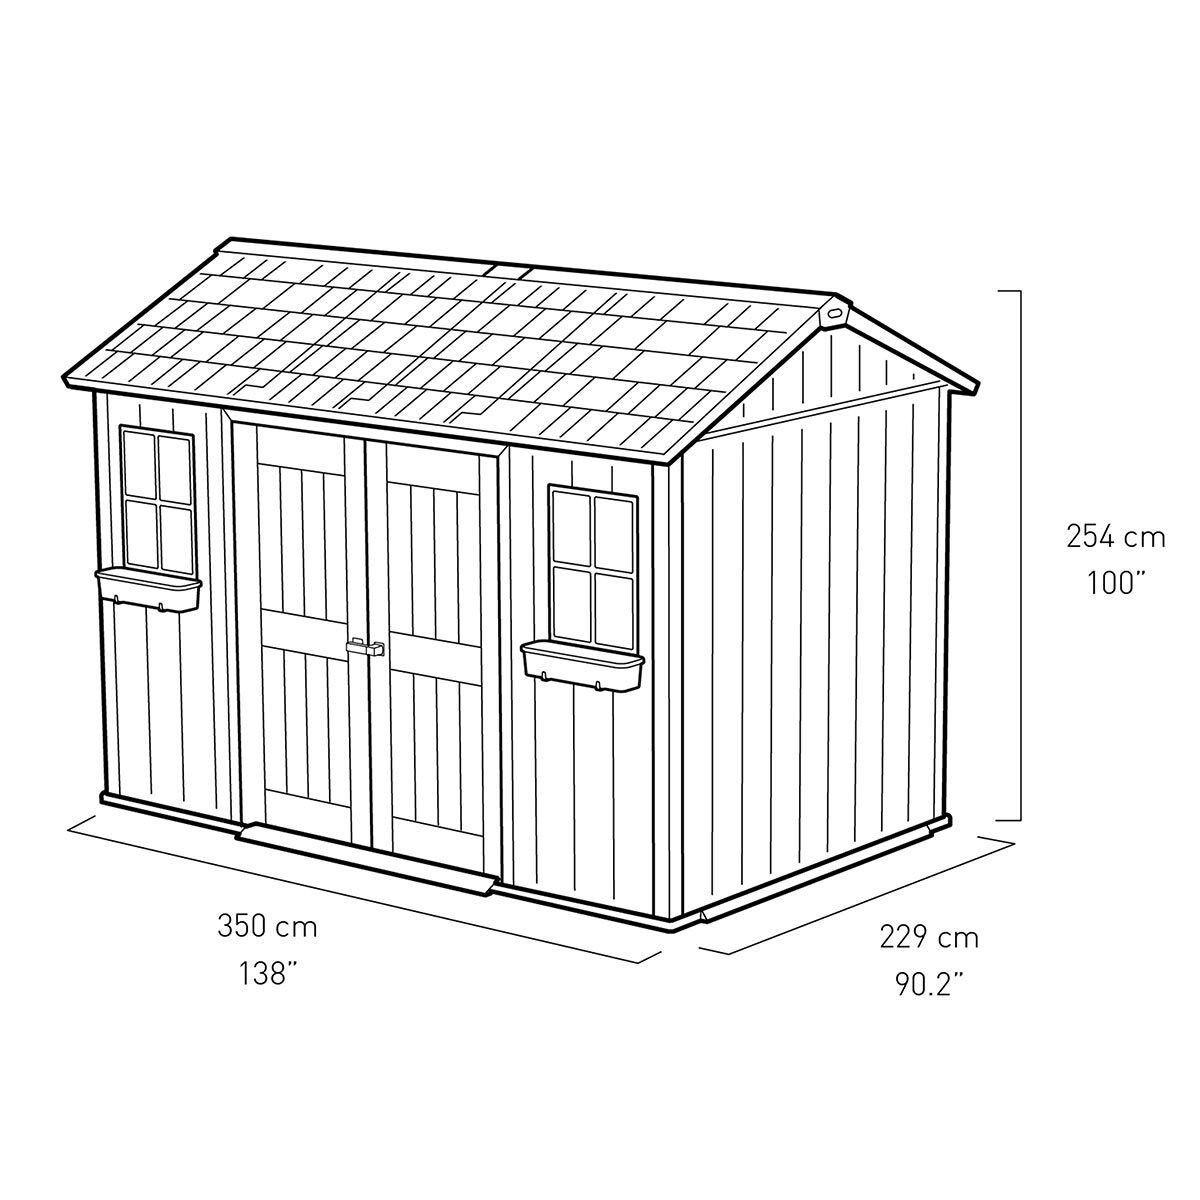 Keter Oakland My Shed 11ft x 7ft 6" (3.4 x 2.3m) Side Door Storage Shed